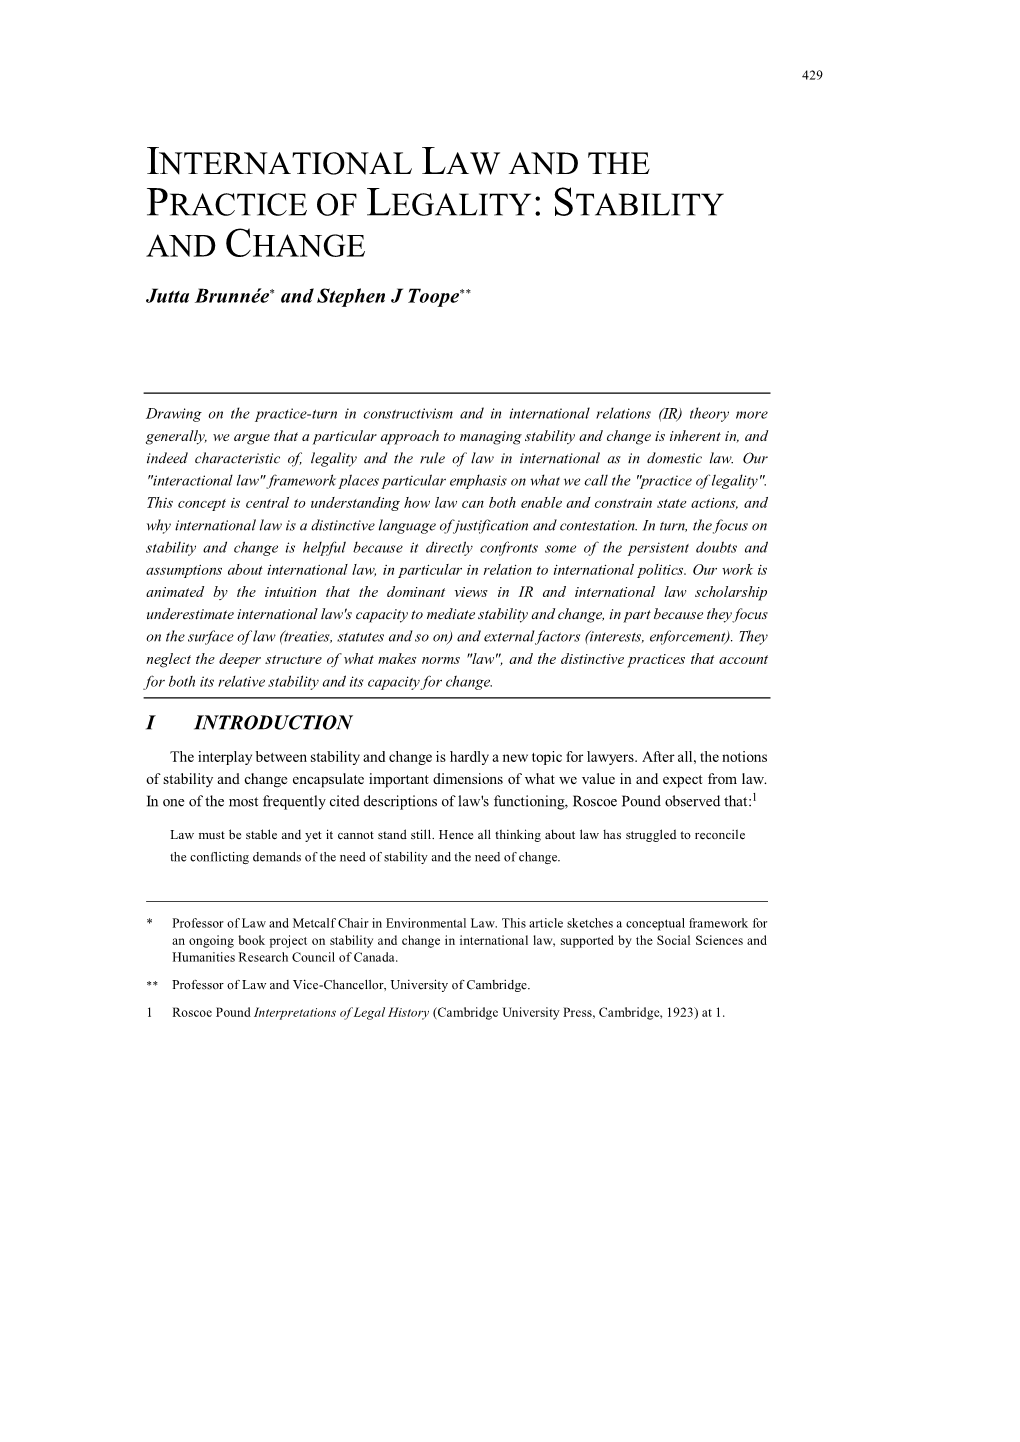 International Law and the Practice of Legality: Stability and Change